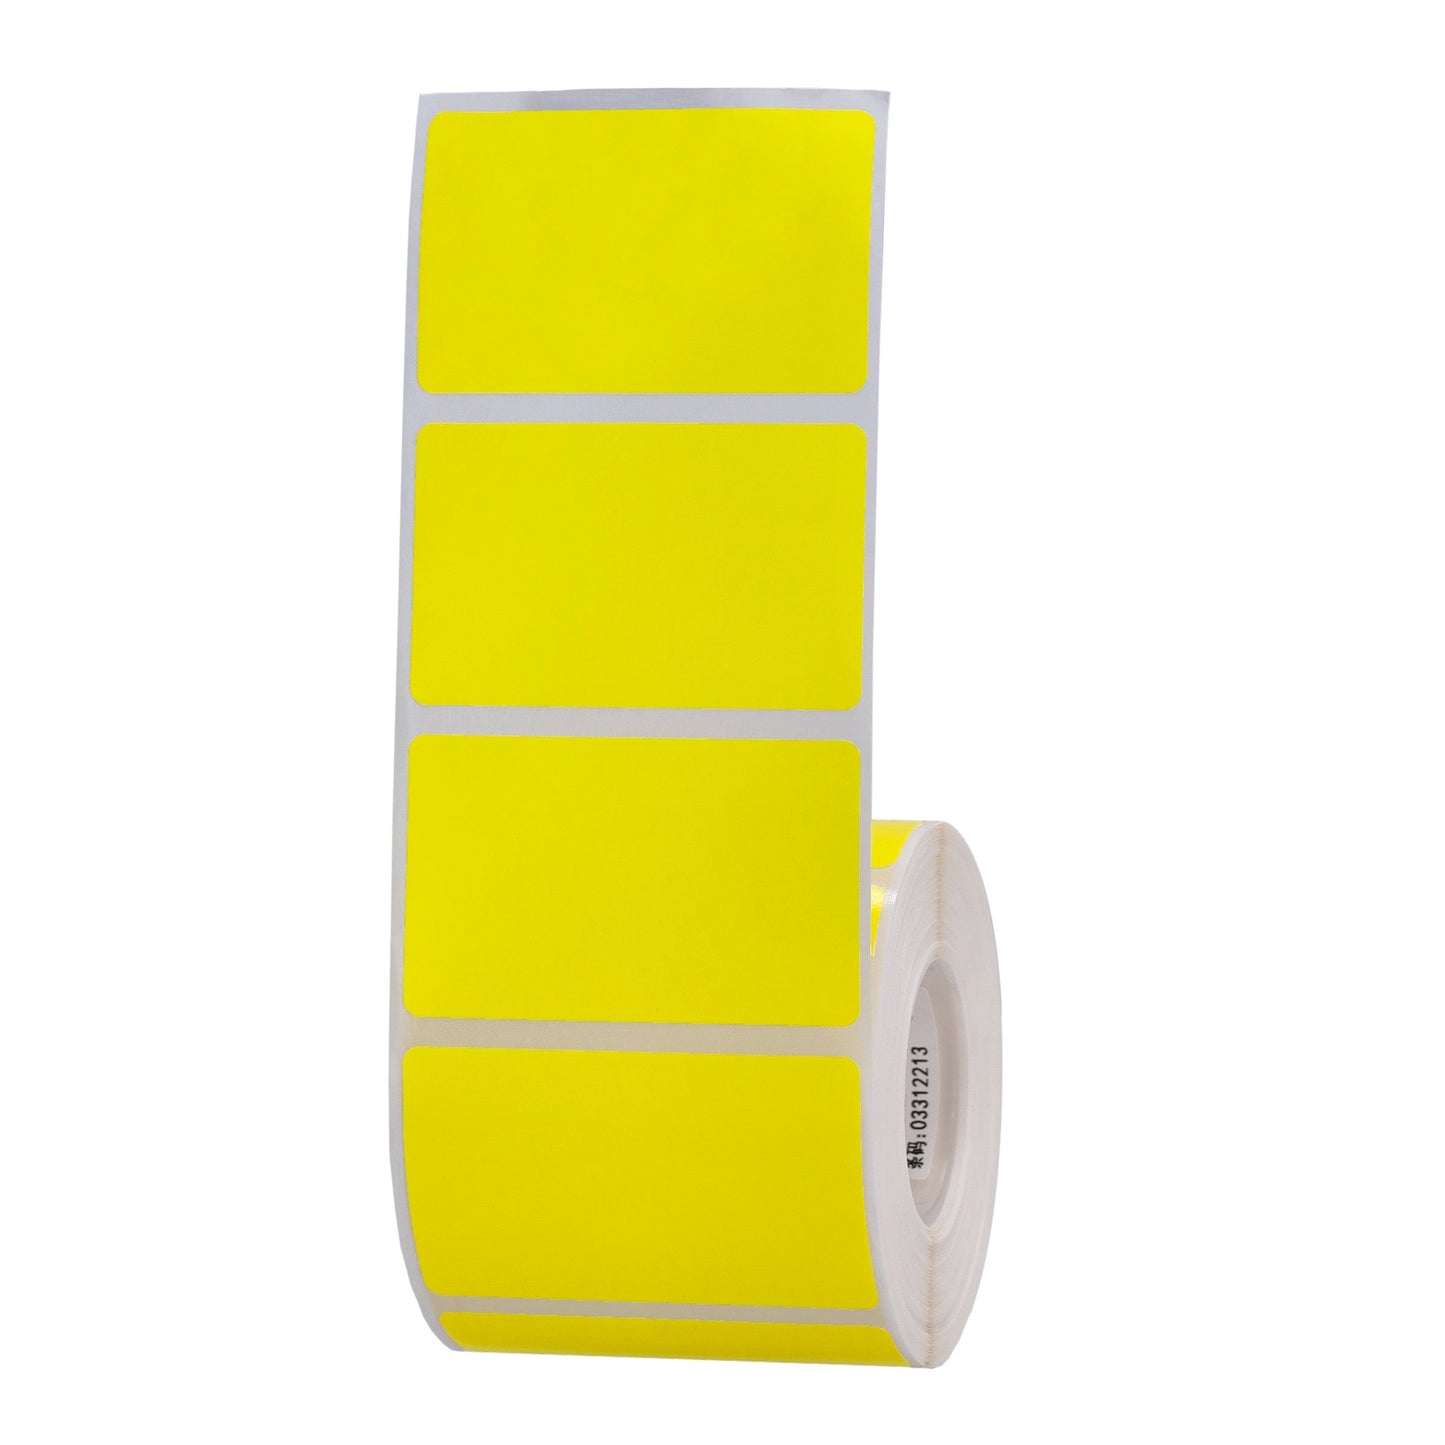 NIIMBOT - Z401 ONLY - PL50*30-500 Thermal Transfer Labels -Yellow